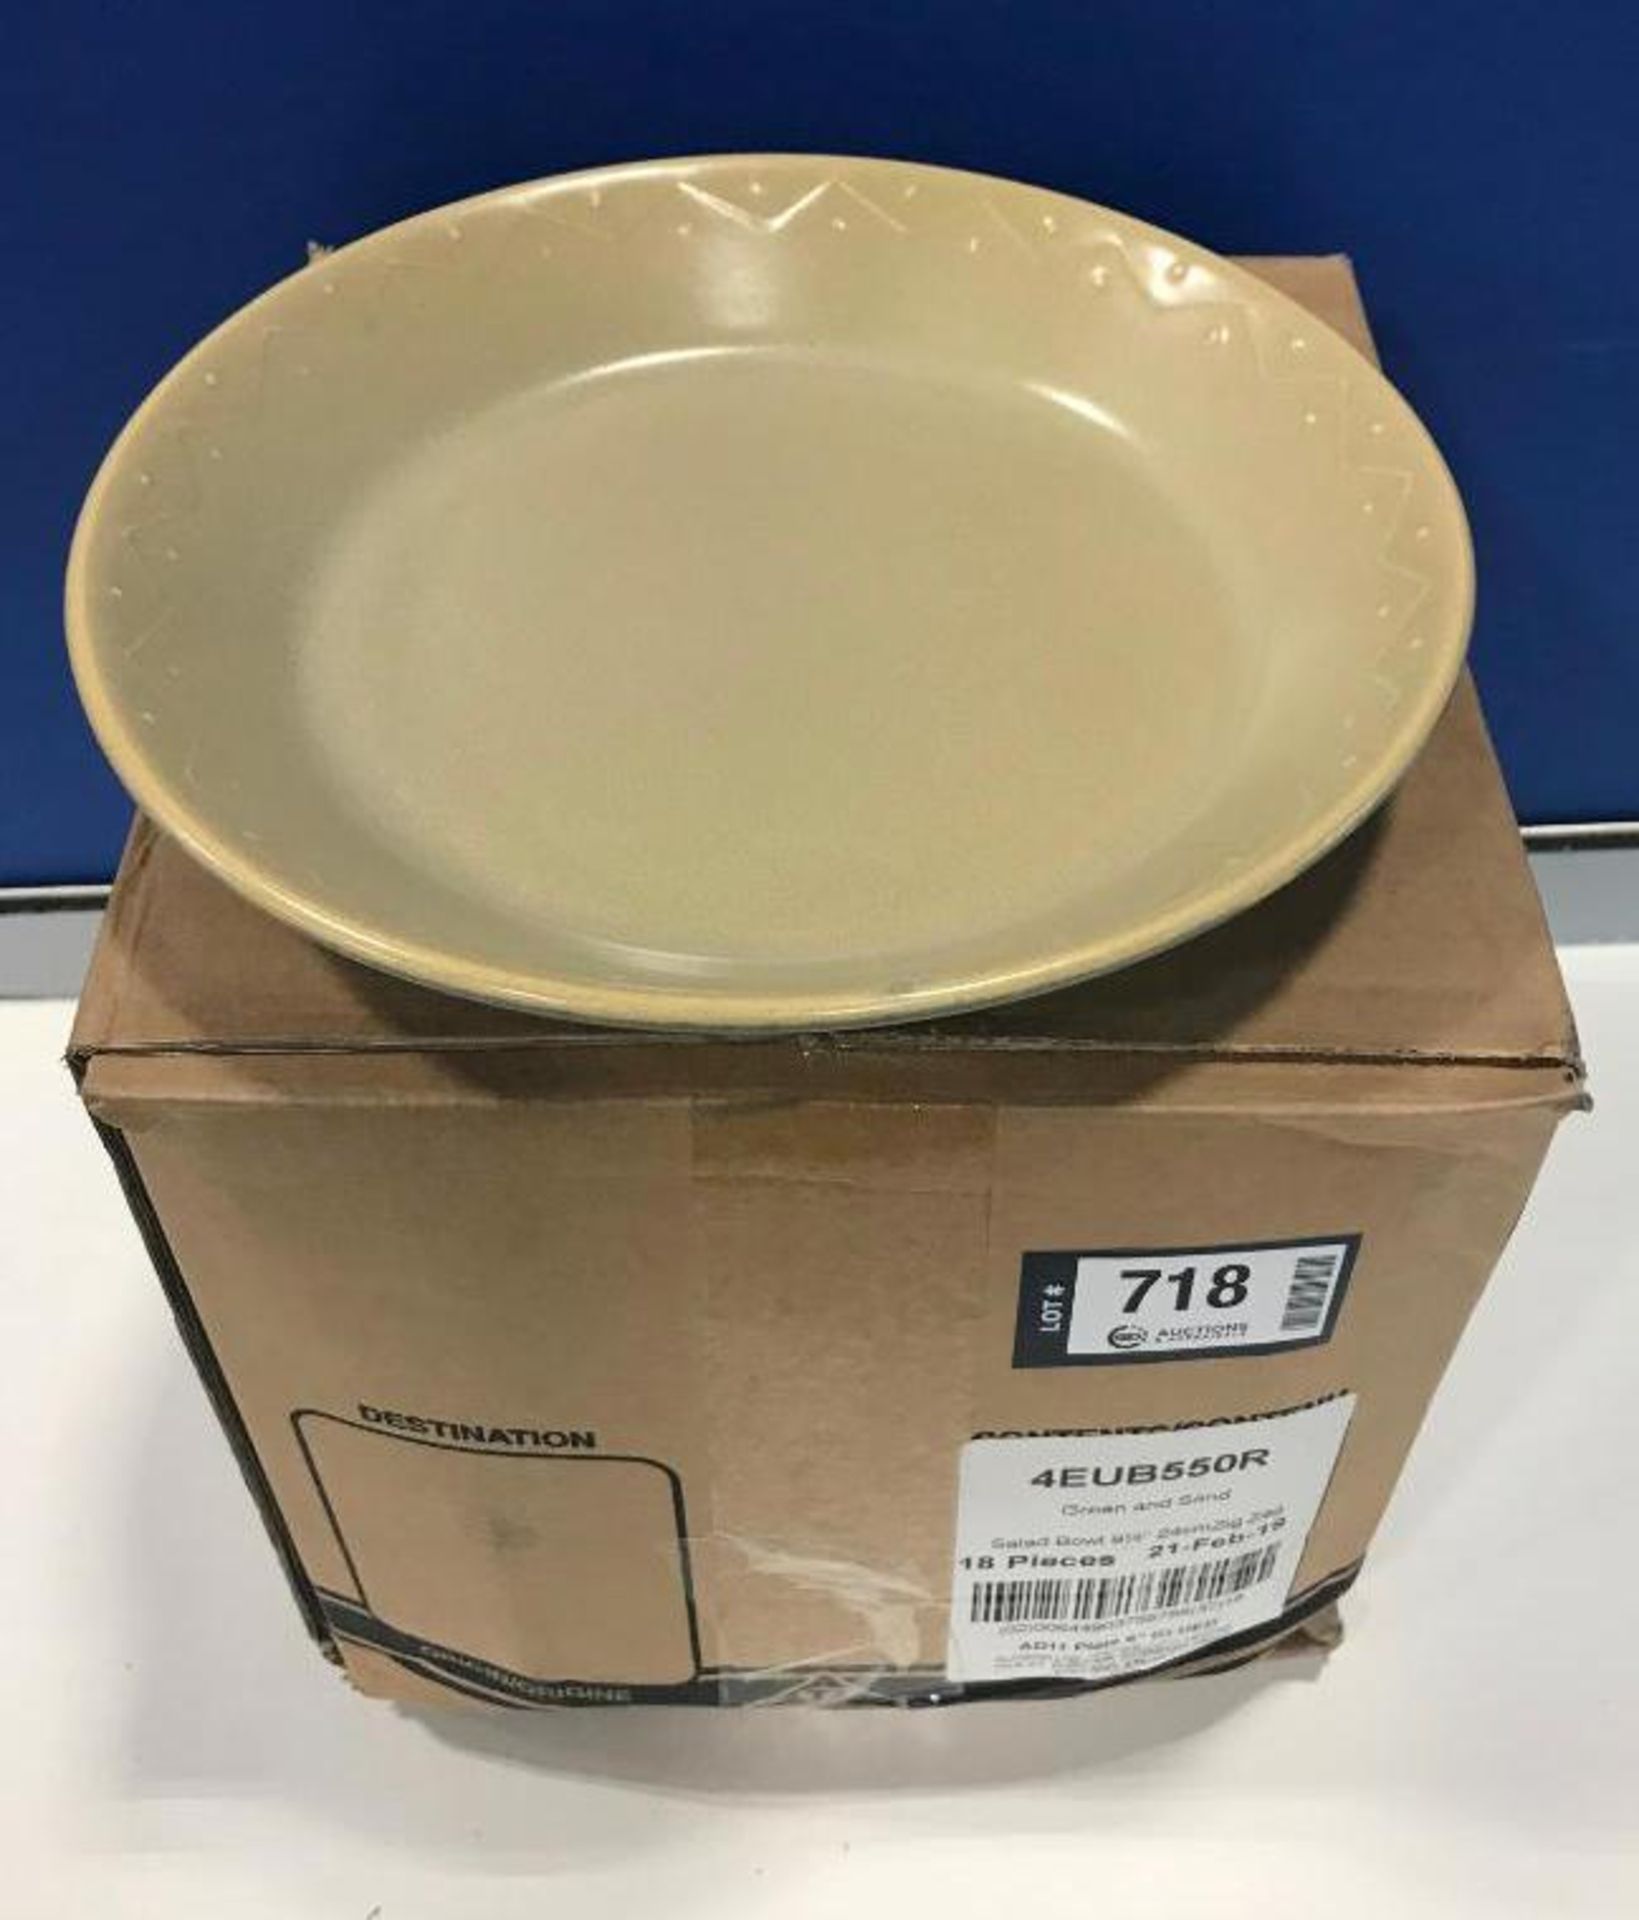 DUDSON GREEN & SAND SALAD BOWL 9.5" - 18/CASE, MADE IN ENGLAND - Image 5 of 6